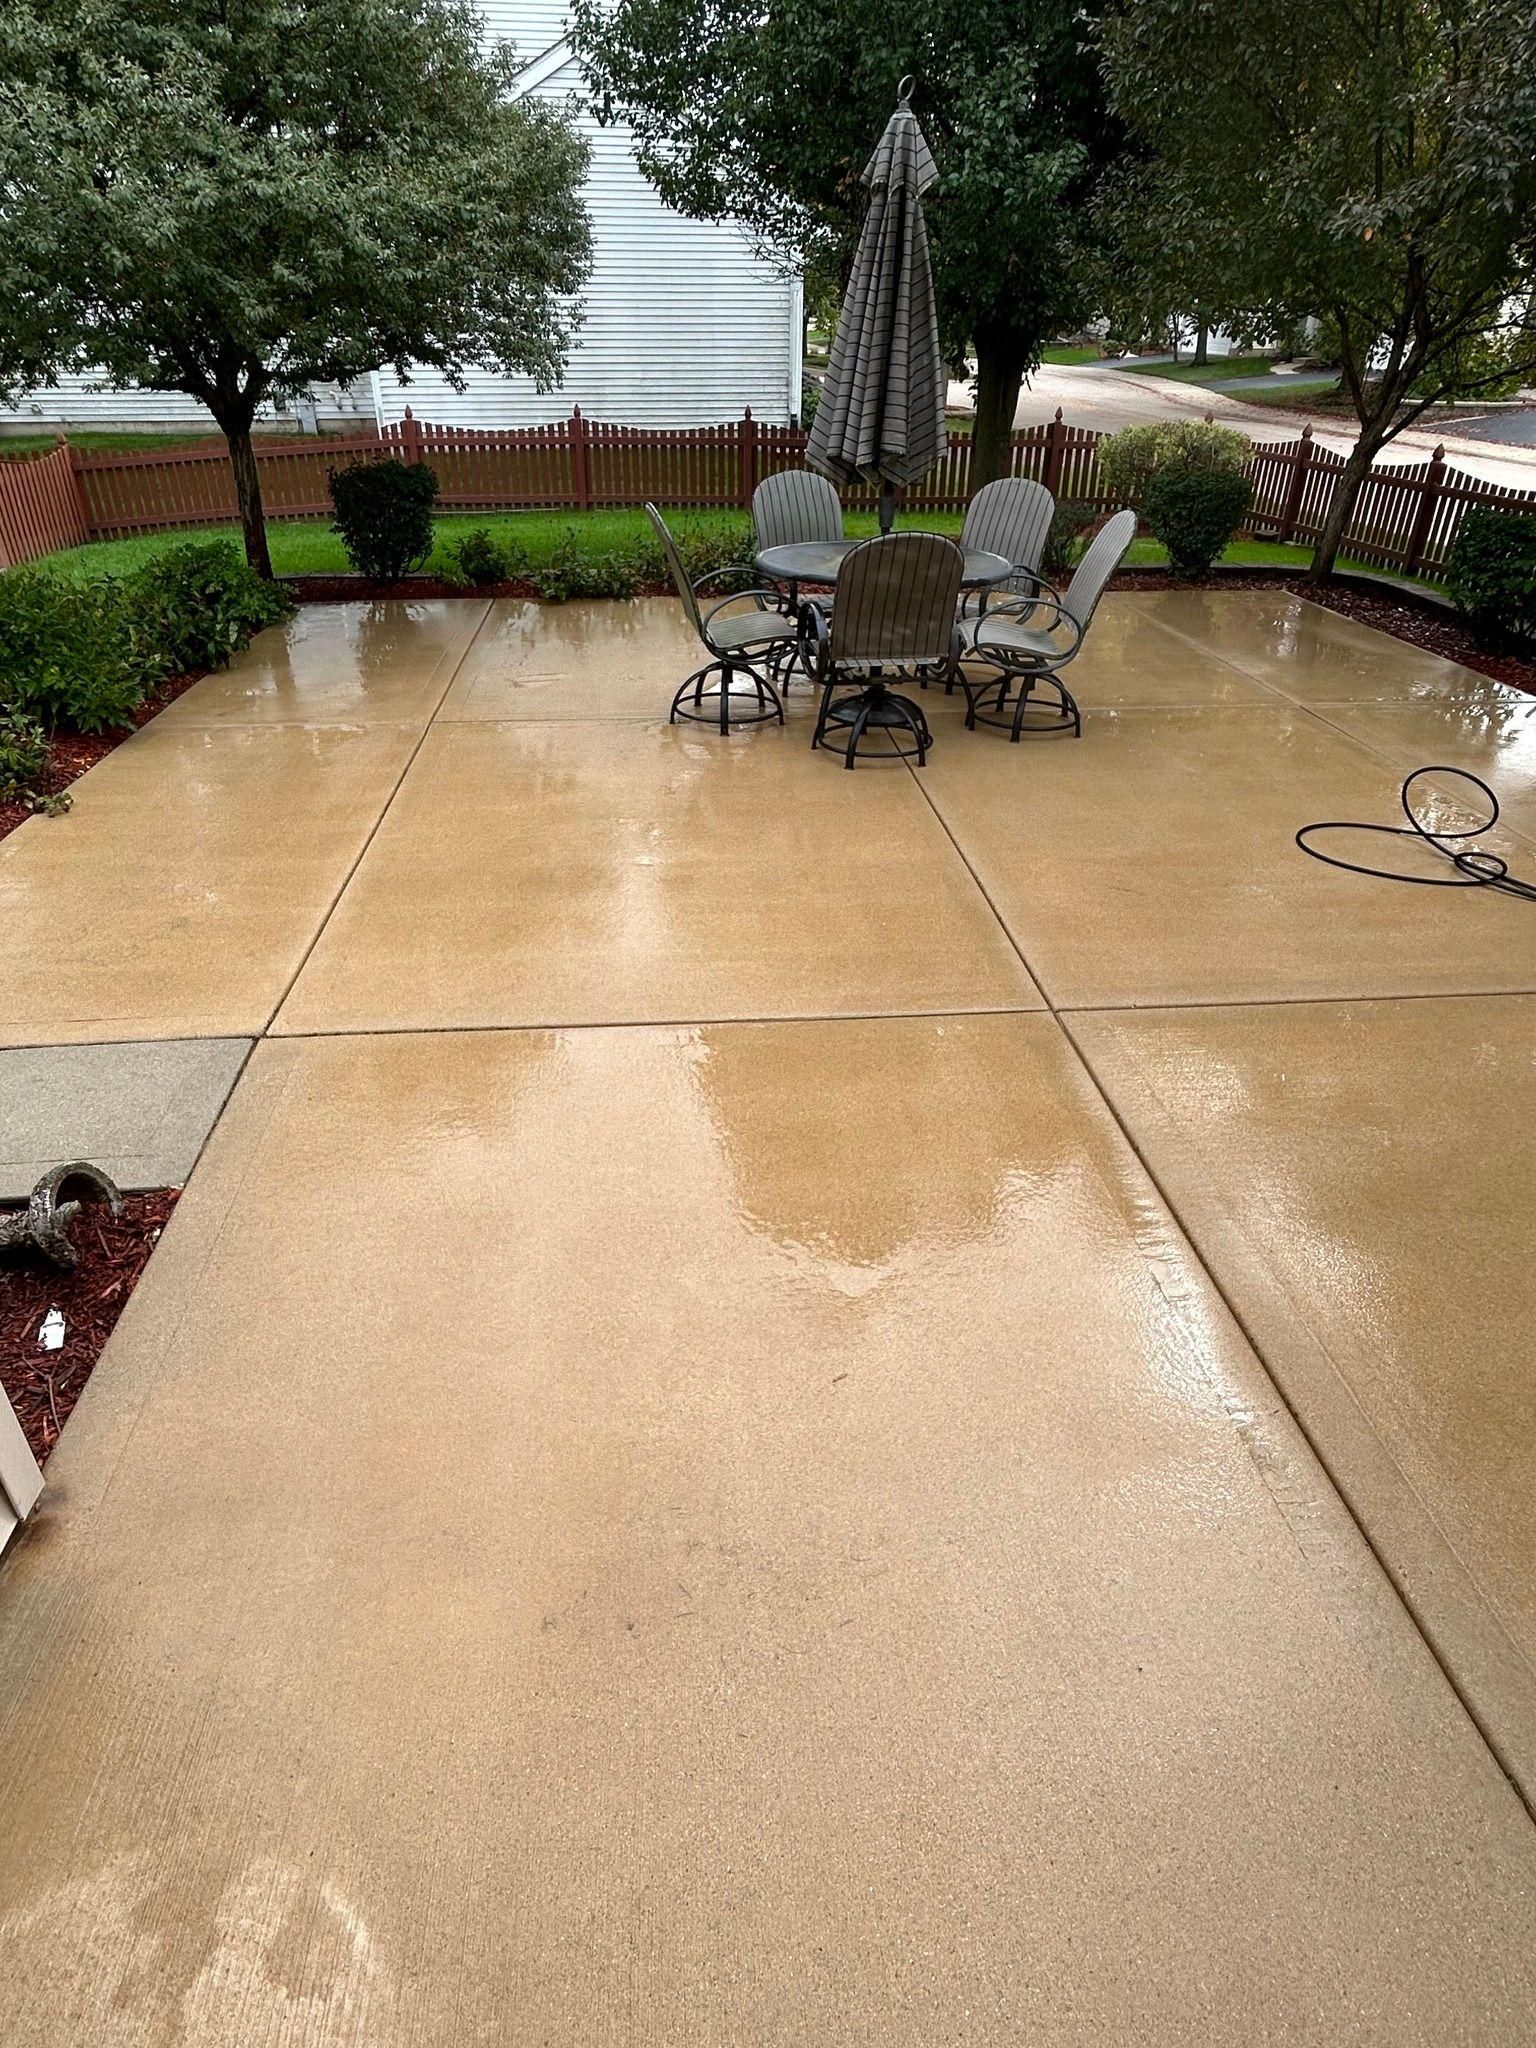 All Photos for J&J Power Washing and Gutter Cleaning in Sycamore, IL